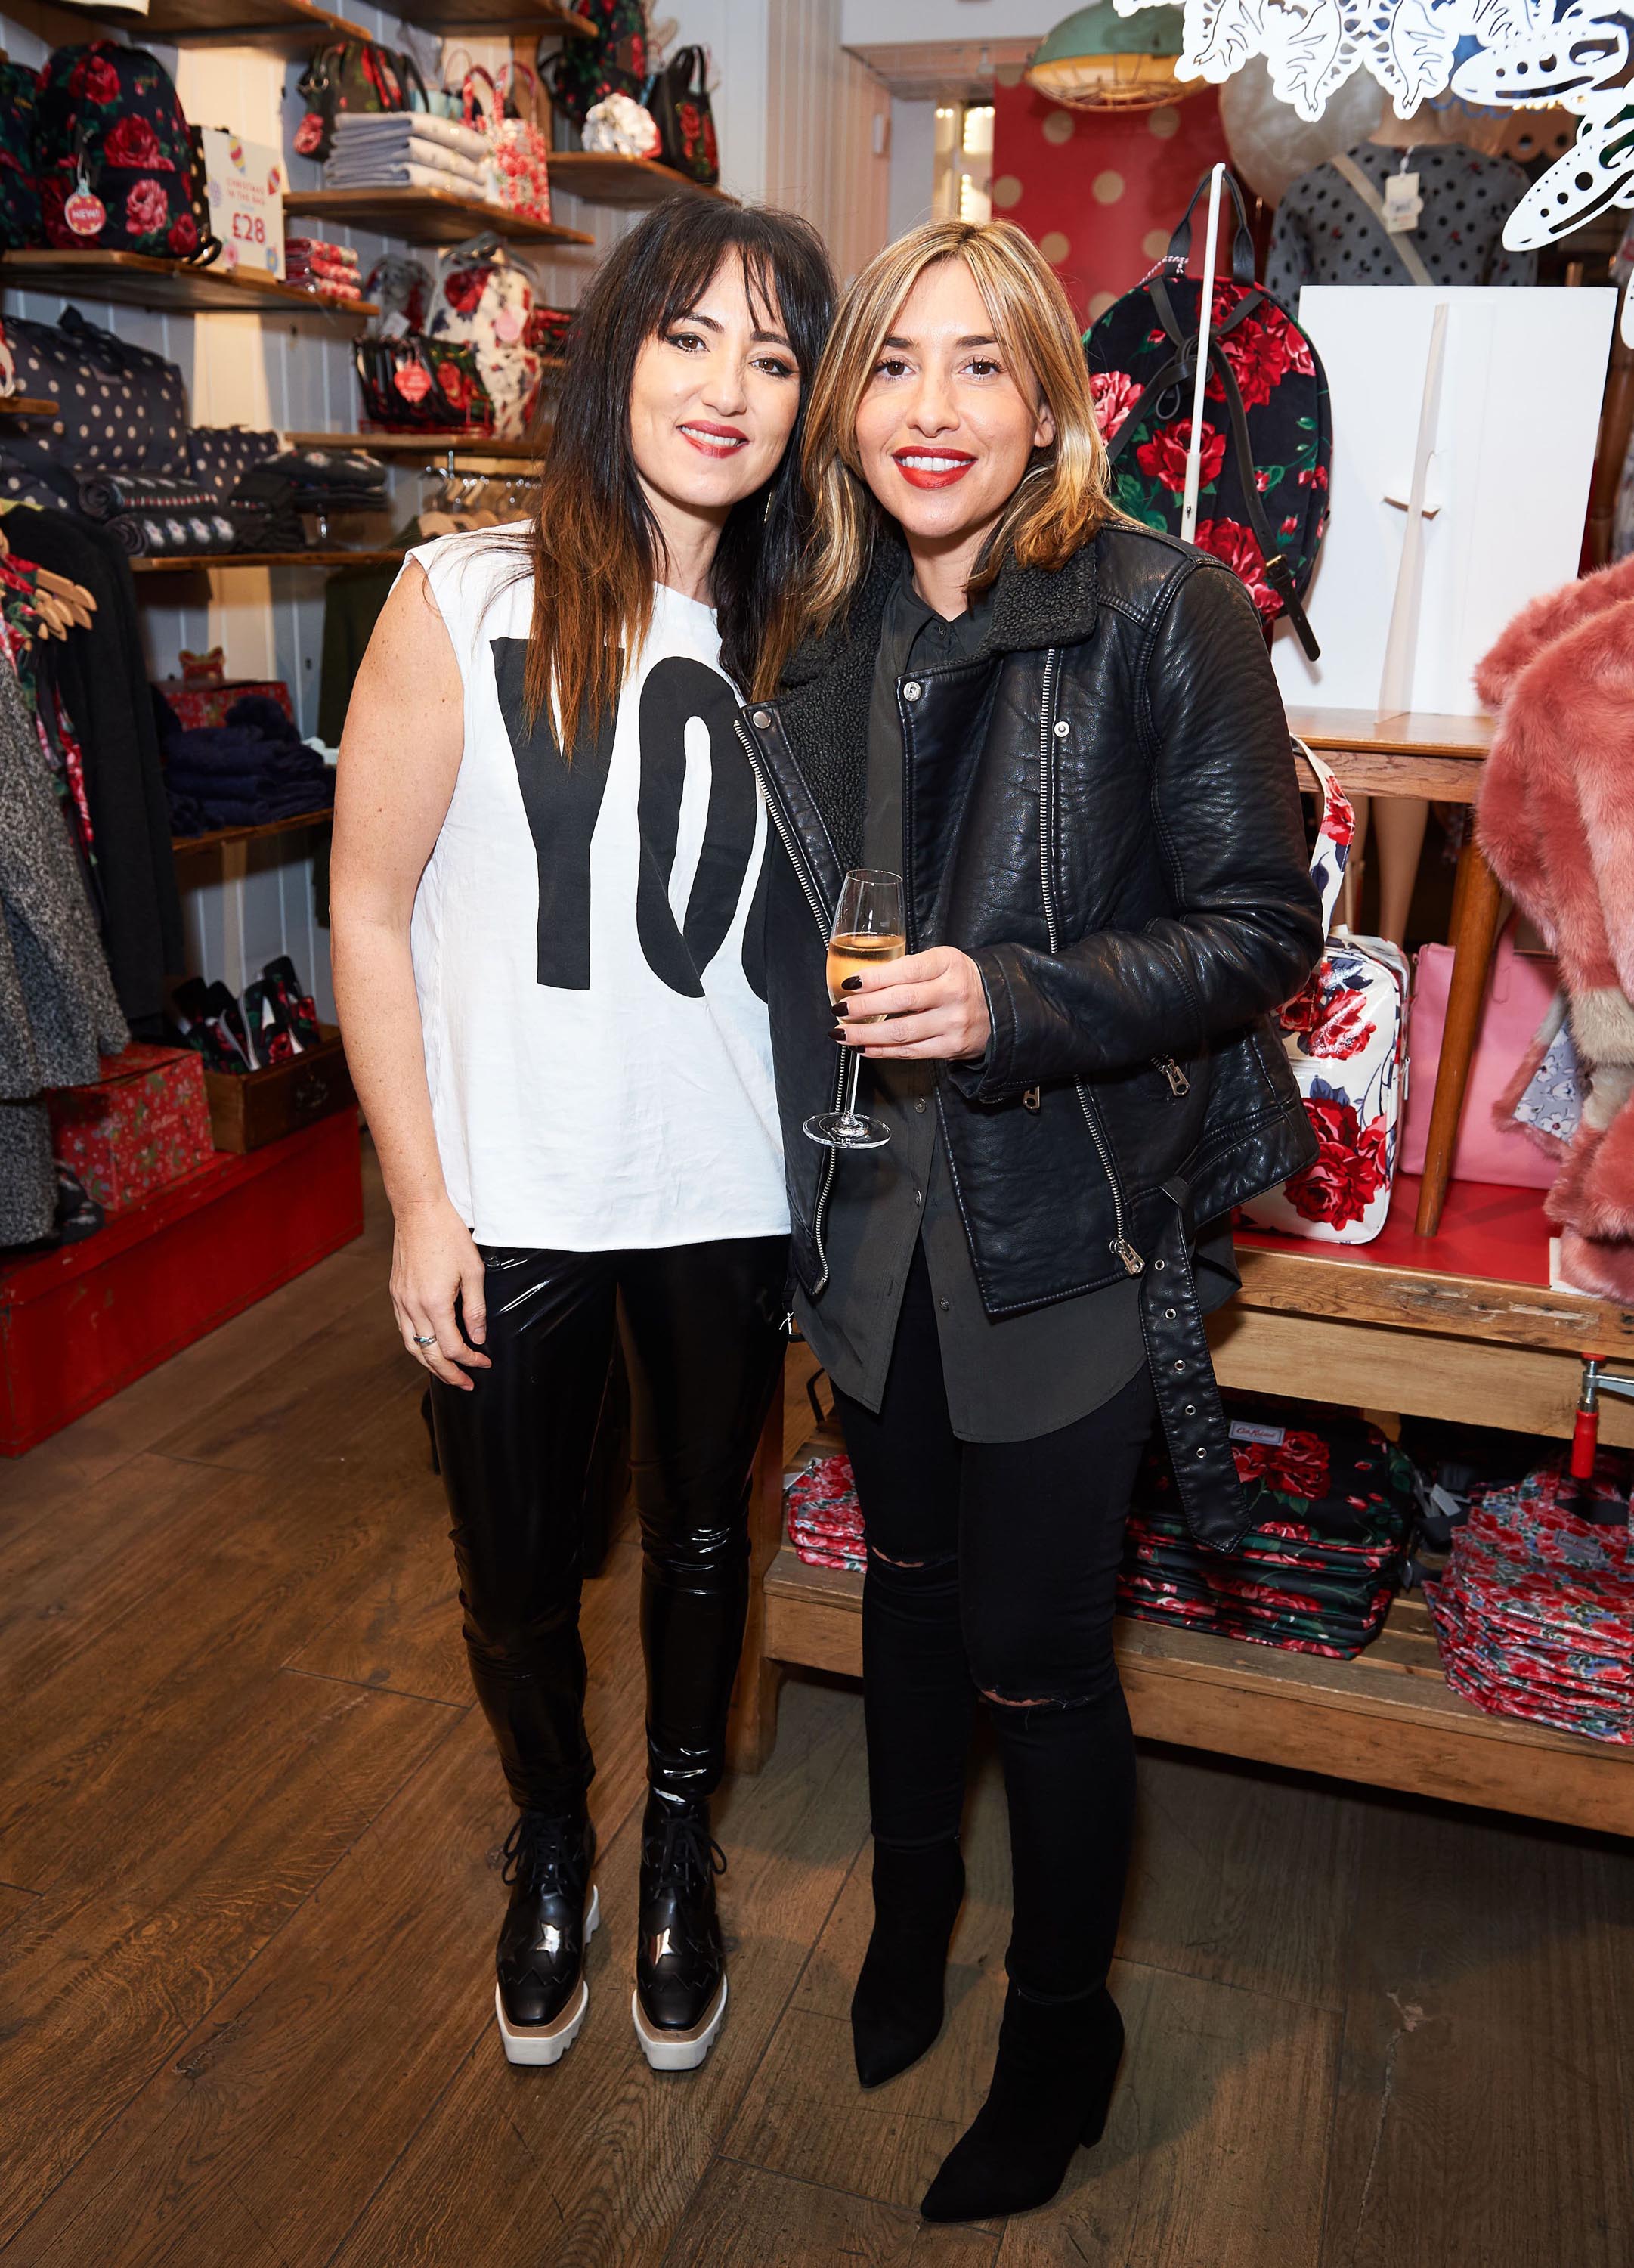 KT Tunstall attends Disney X Cath Kidston Mickey and Minnie exclusive VIP launch